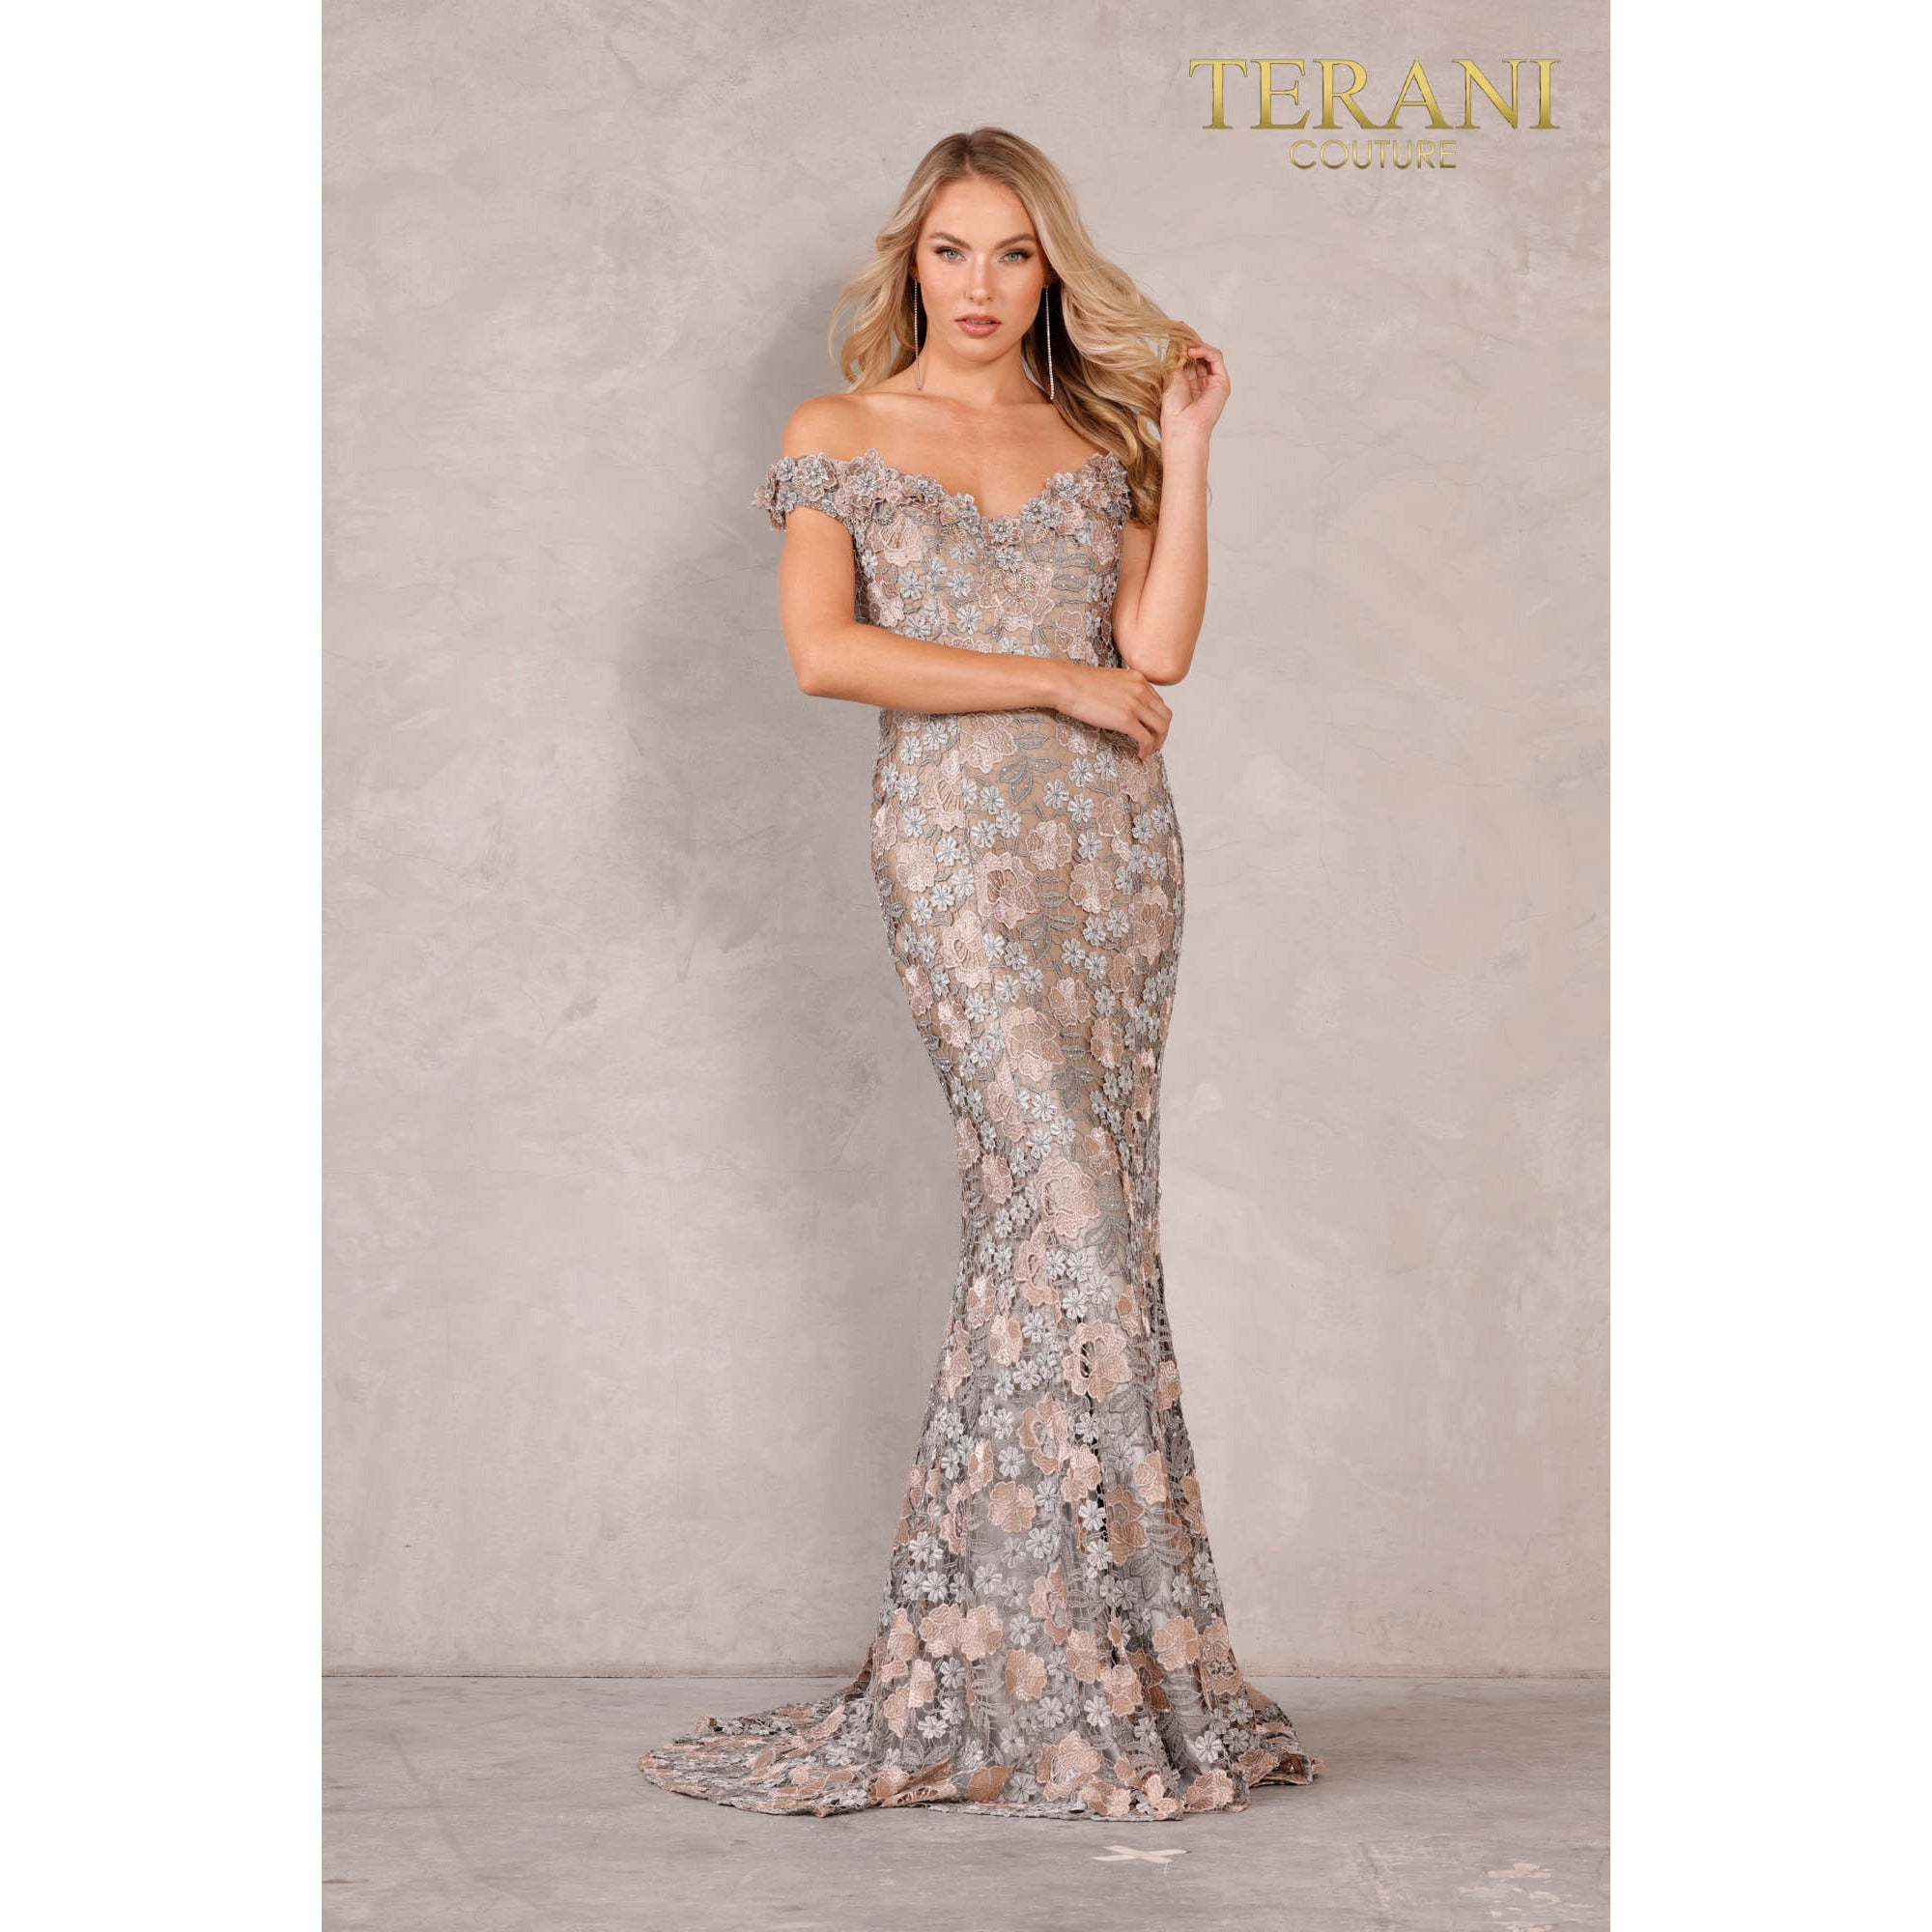 Terani Couture 2111M5271 Mother Of The Bride Dress